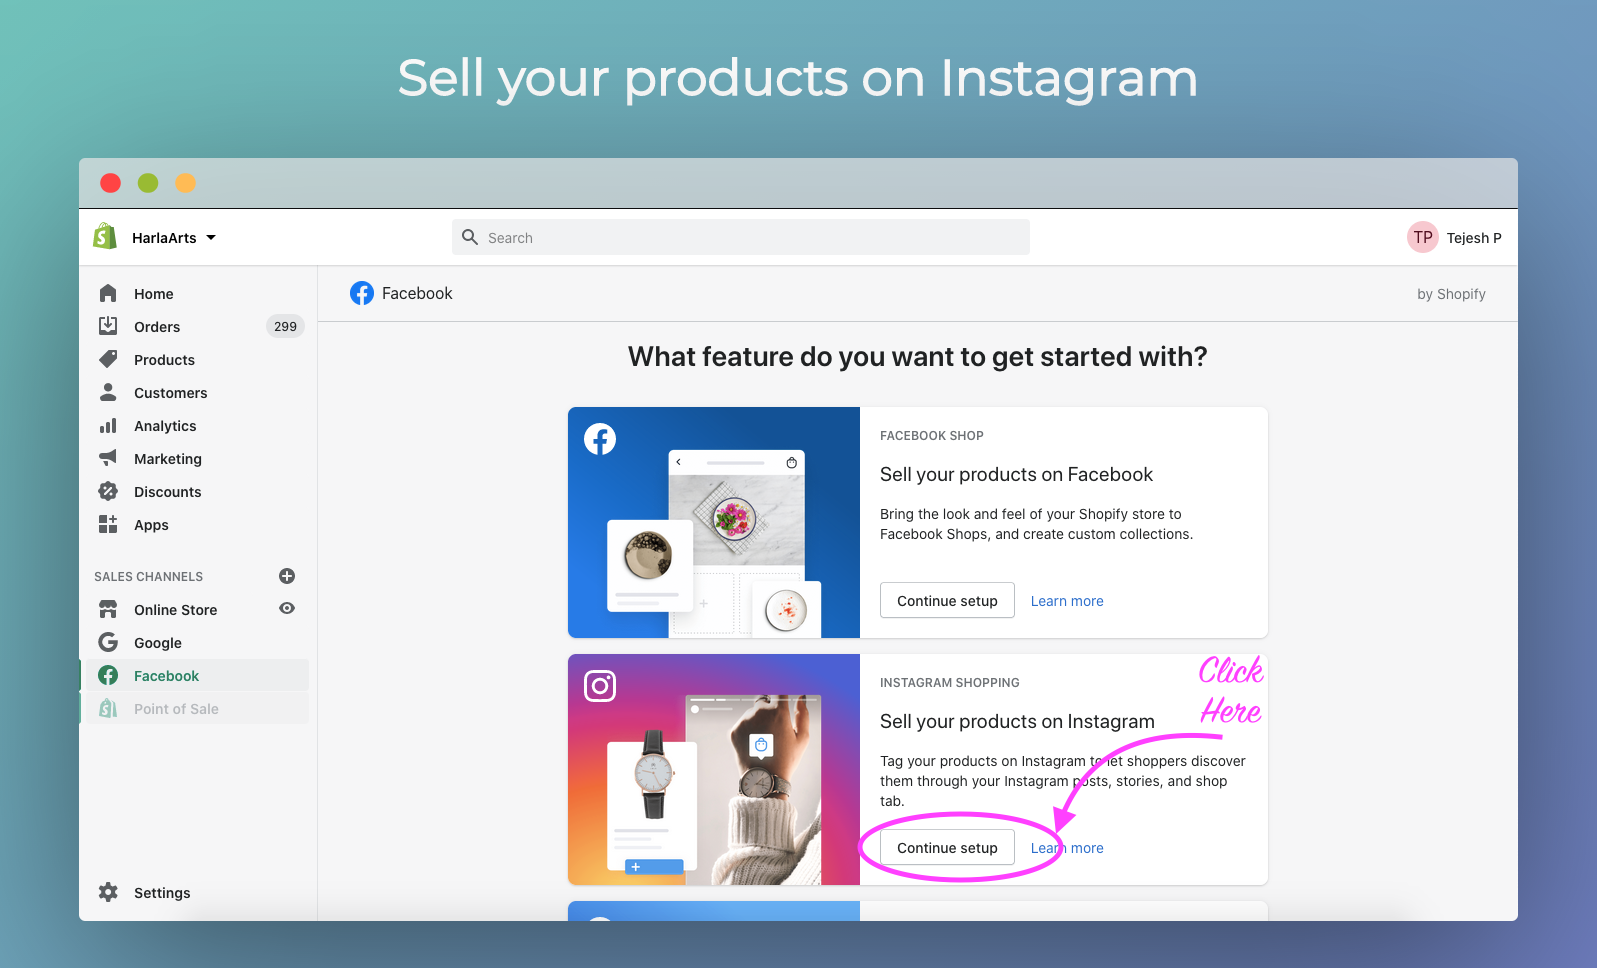 Click sell your products on Instagram